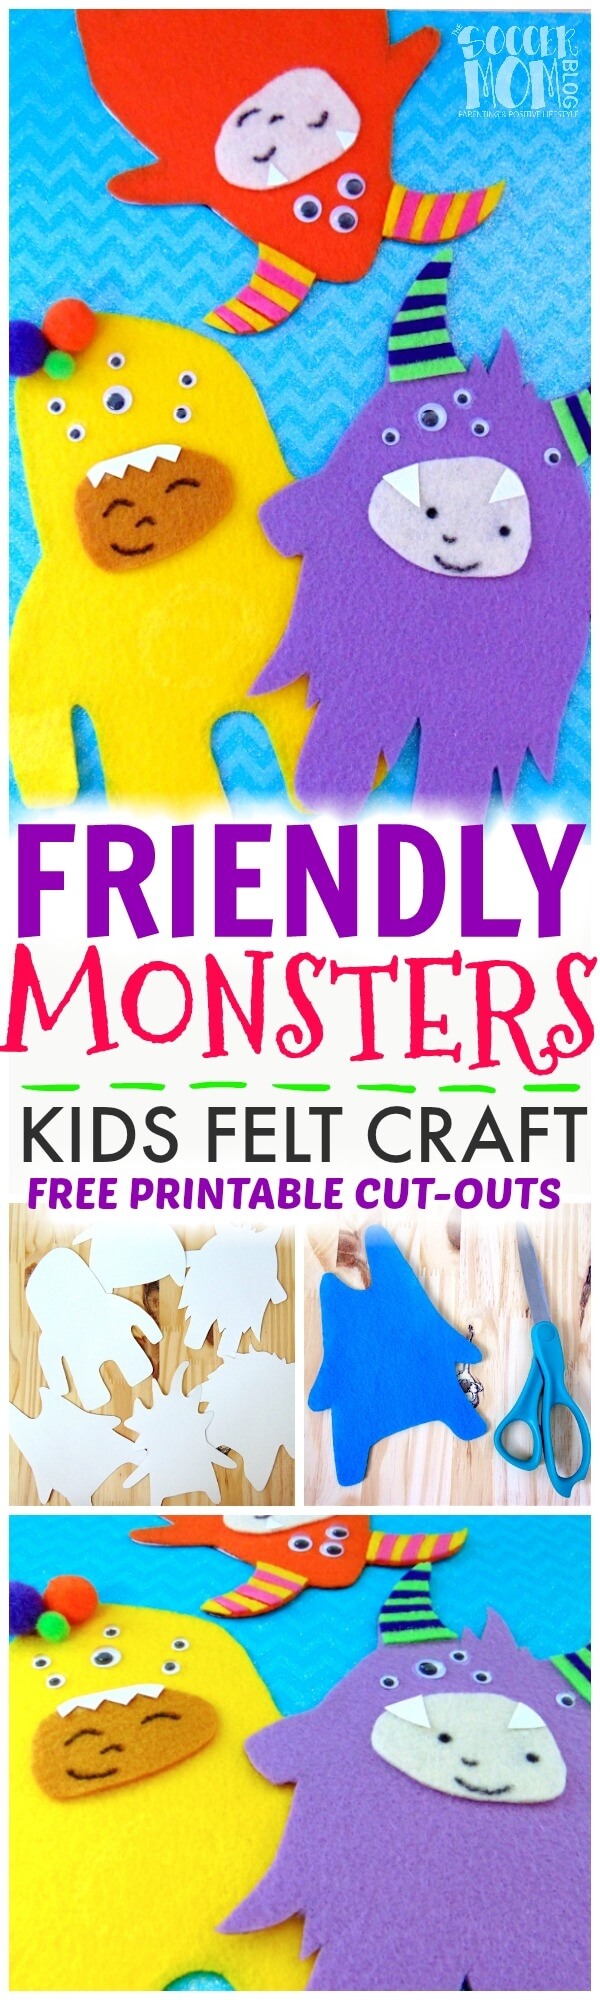 These colorful felt craft "friendly monsters" put a new spin on paper dolls! So much fun for kids to make and play with over and over again!